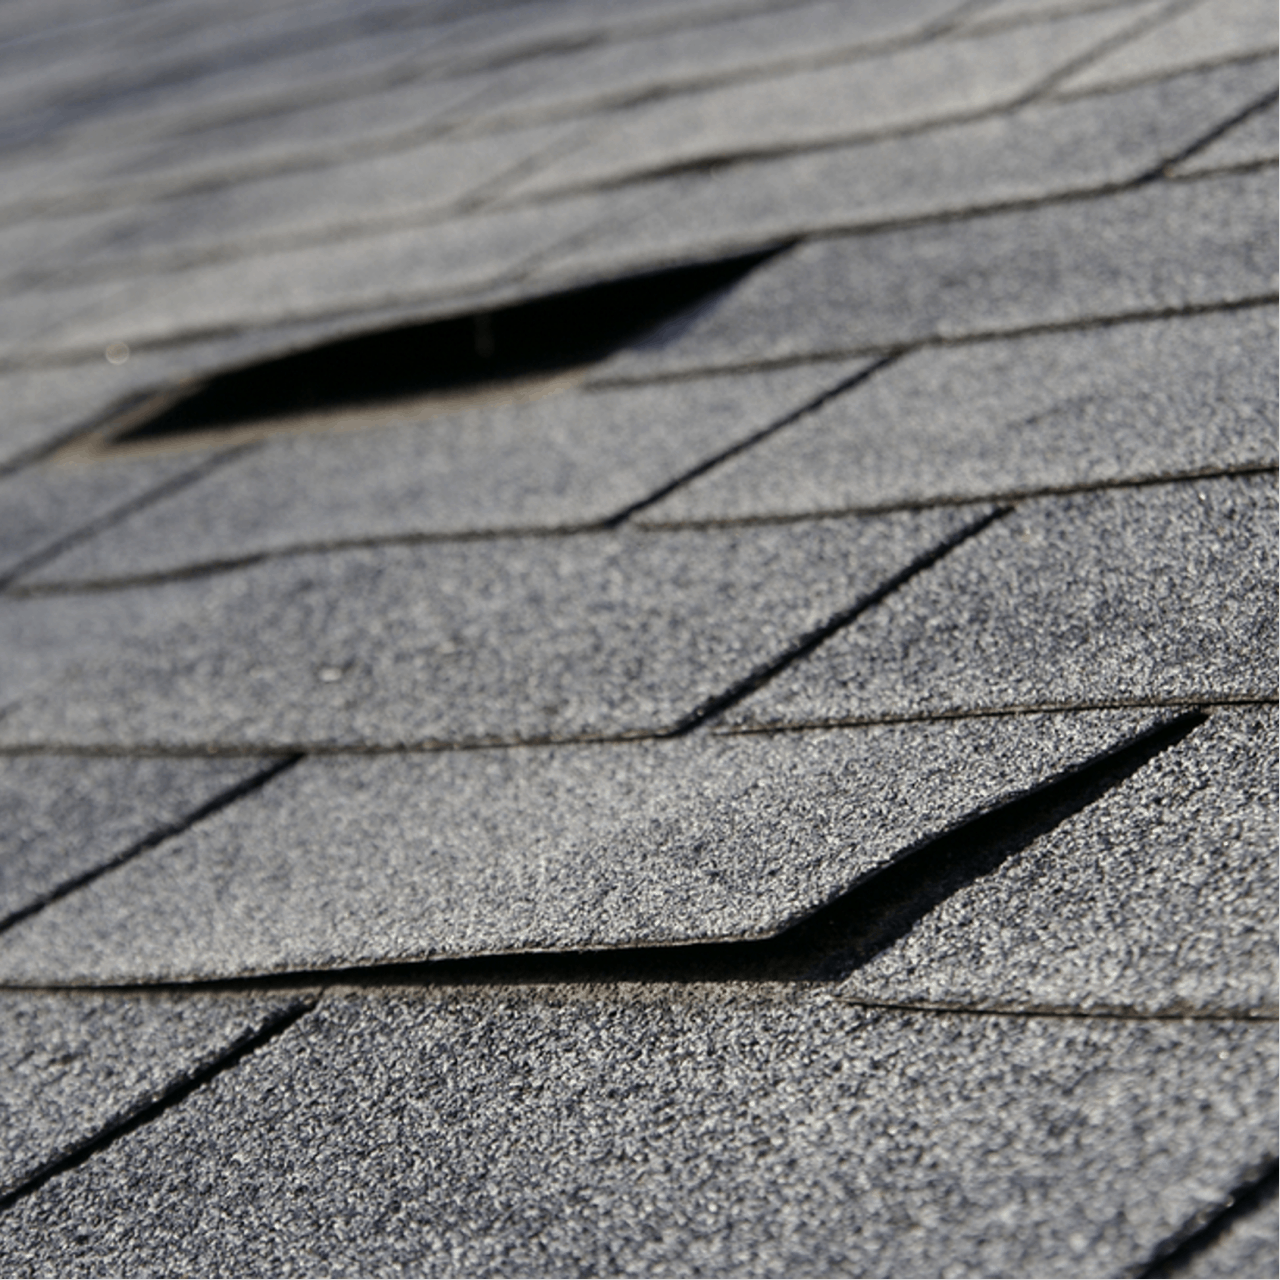 loose shingles from wind damage